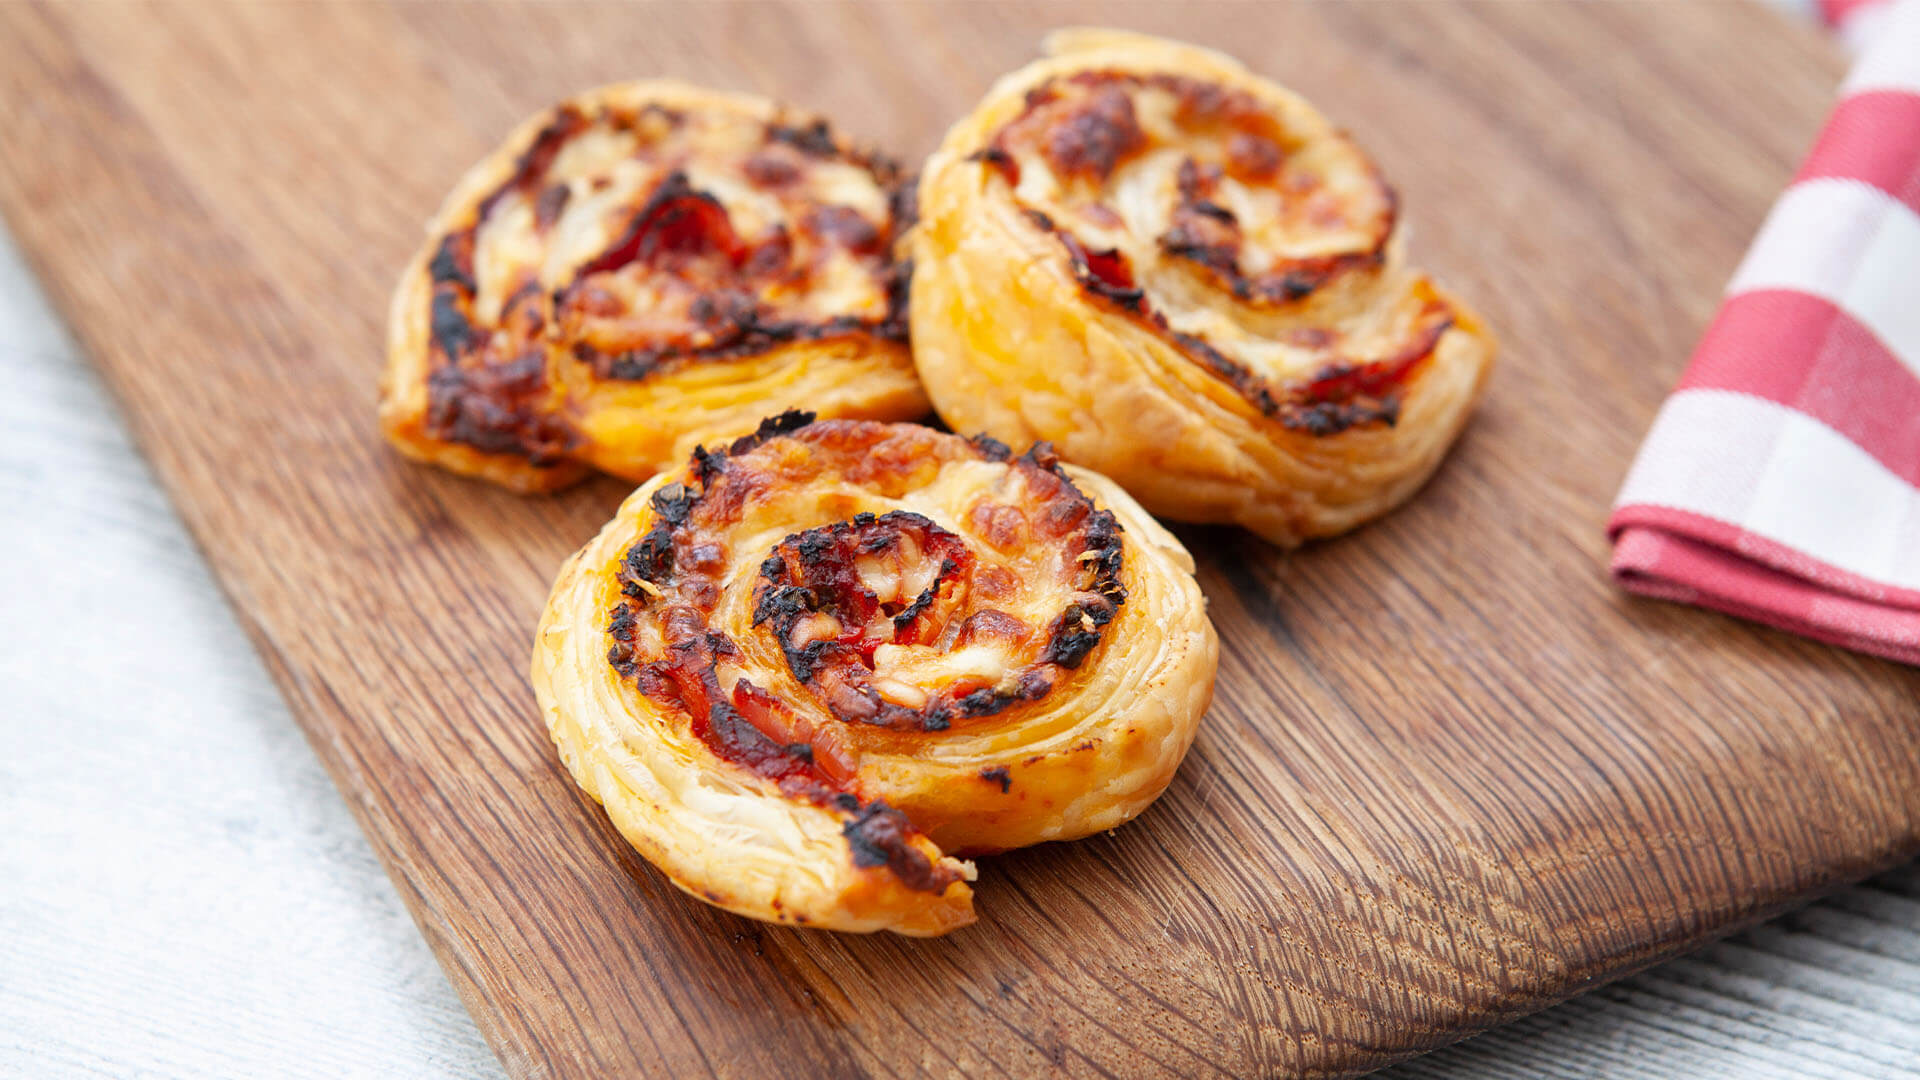 gluten-free recipes for kids: pizza scrolls are great as a lunchbox treat or party food